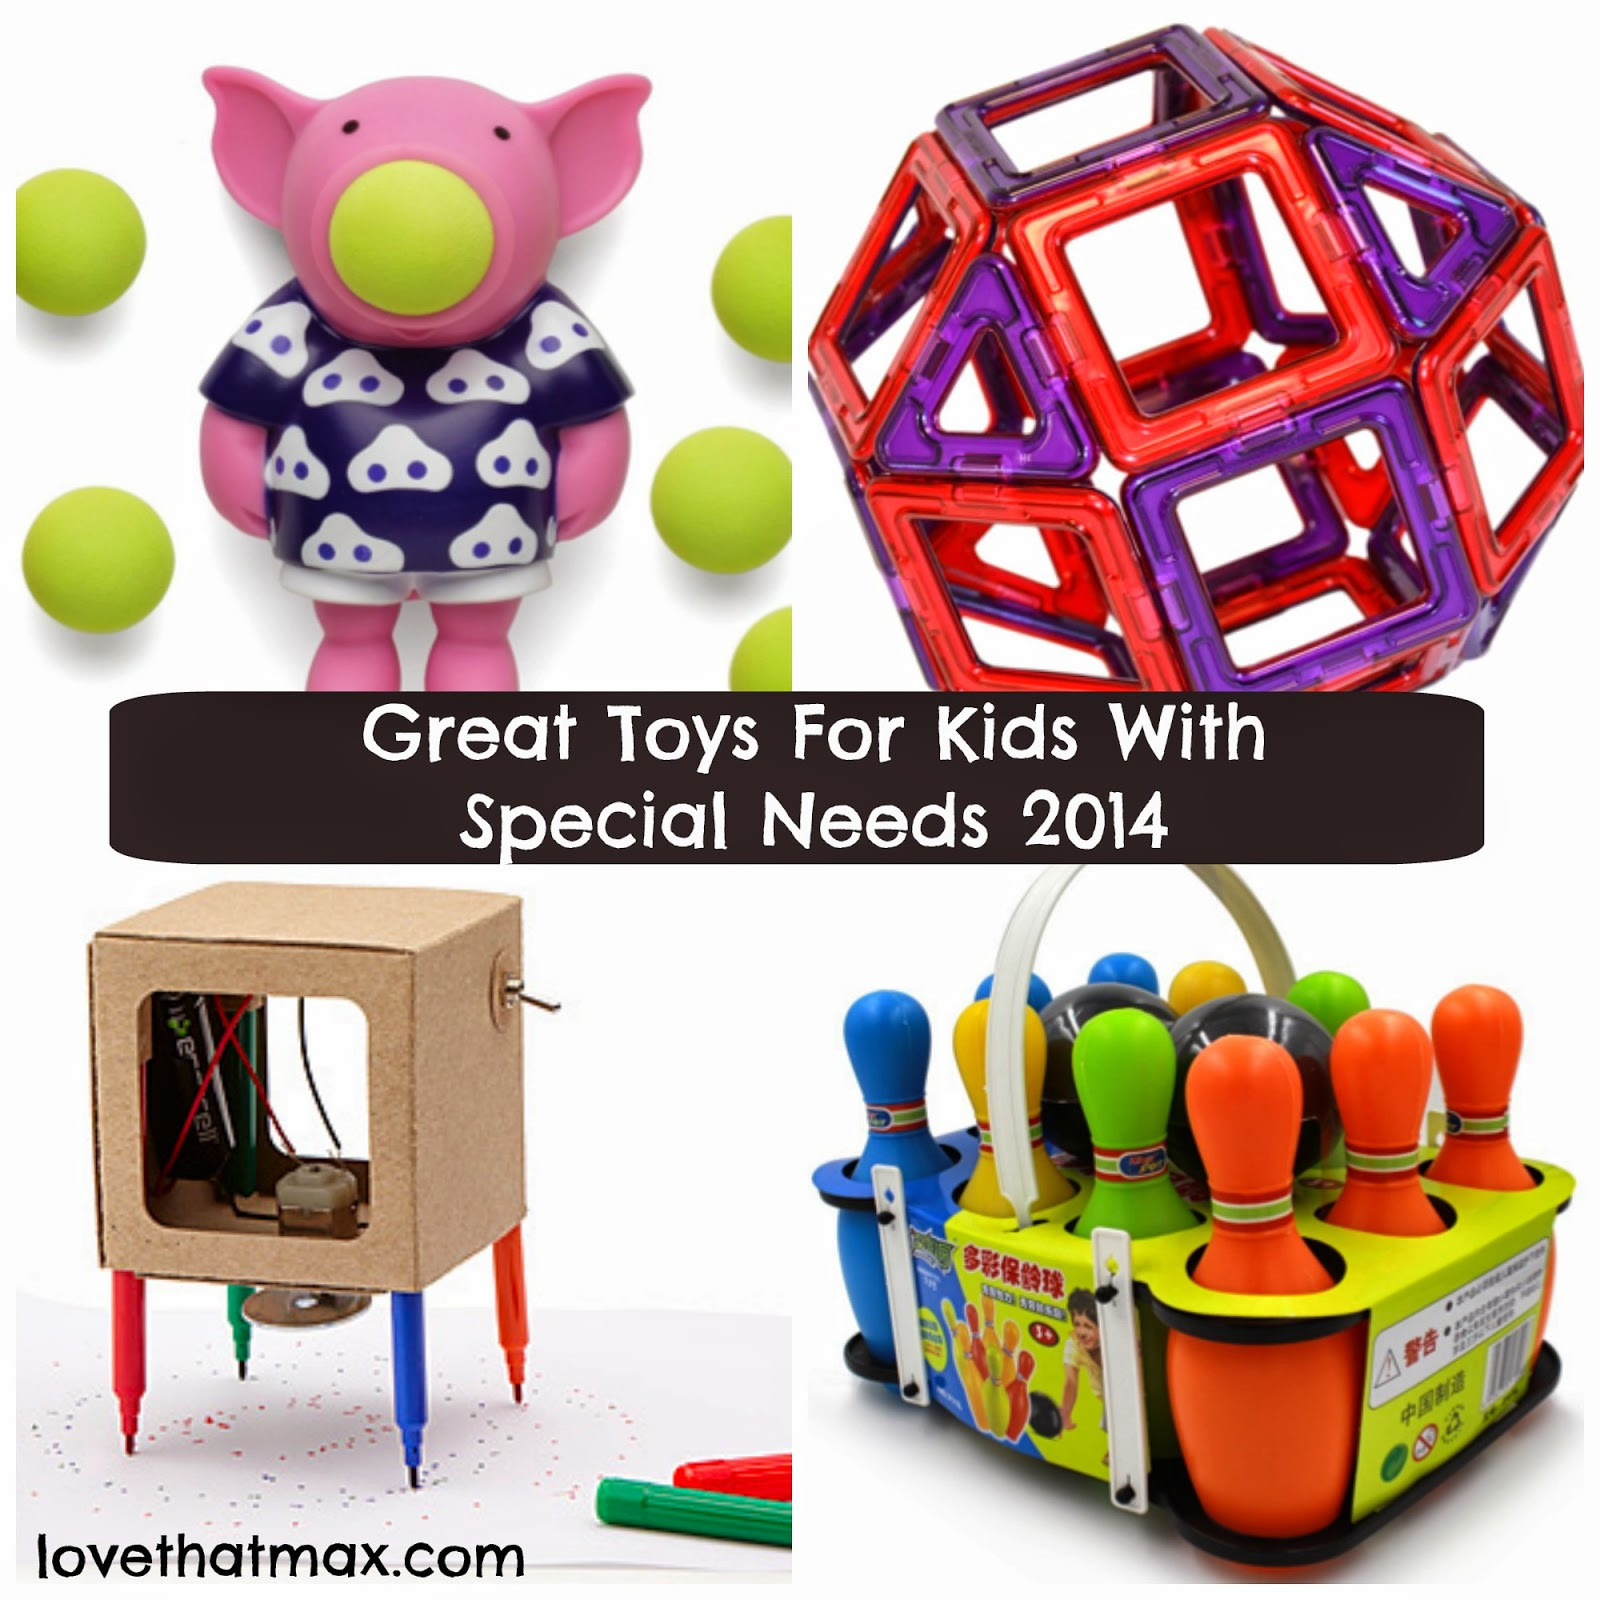 Gifts For Special Needs Children
 Love That Max Holiday Gifts And Toys For Kids With